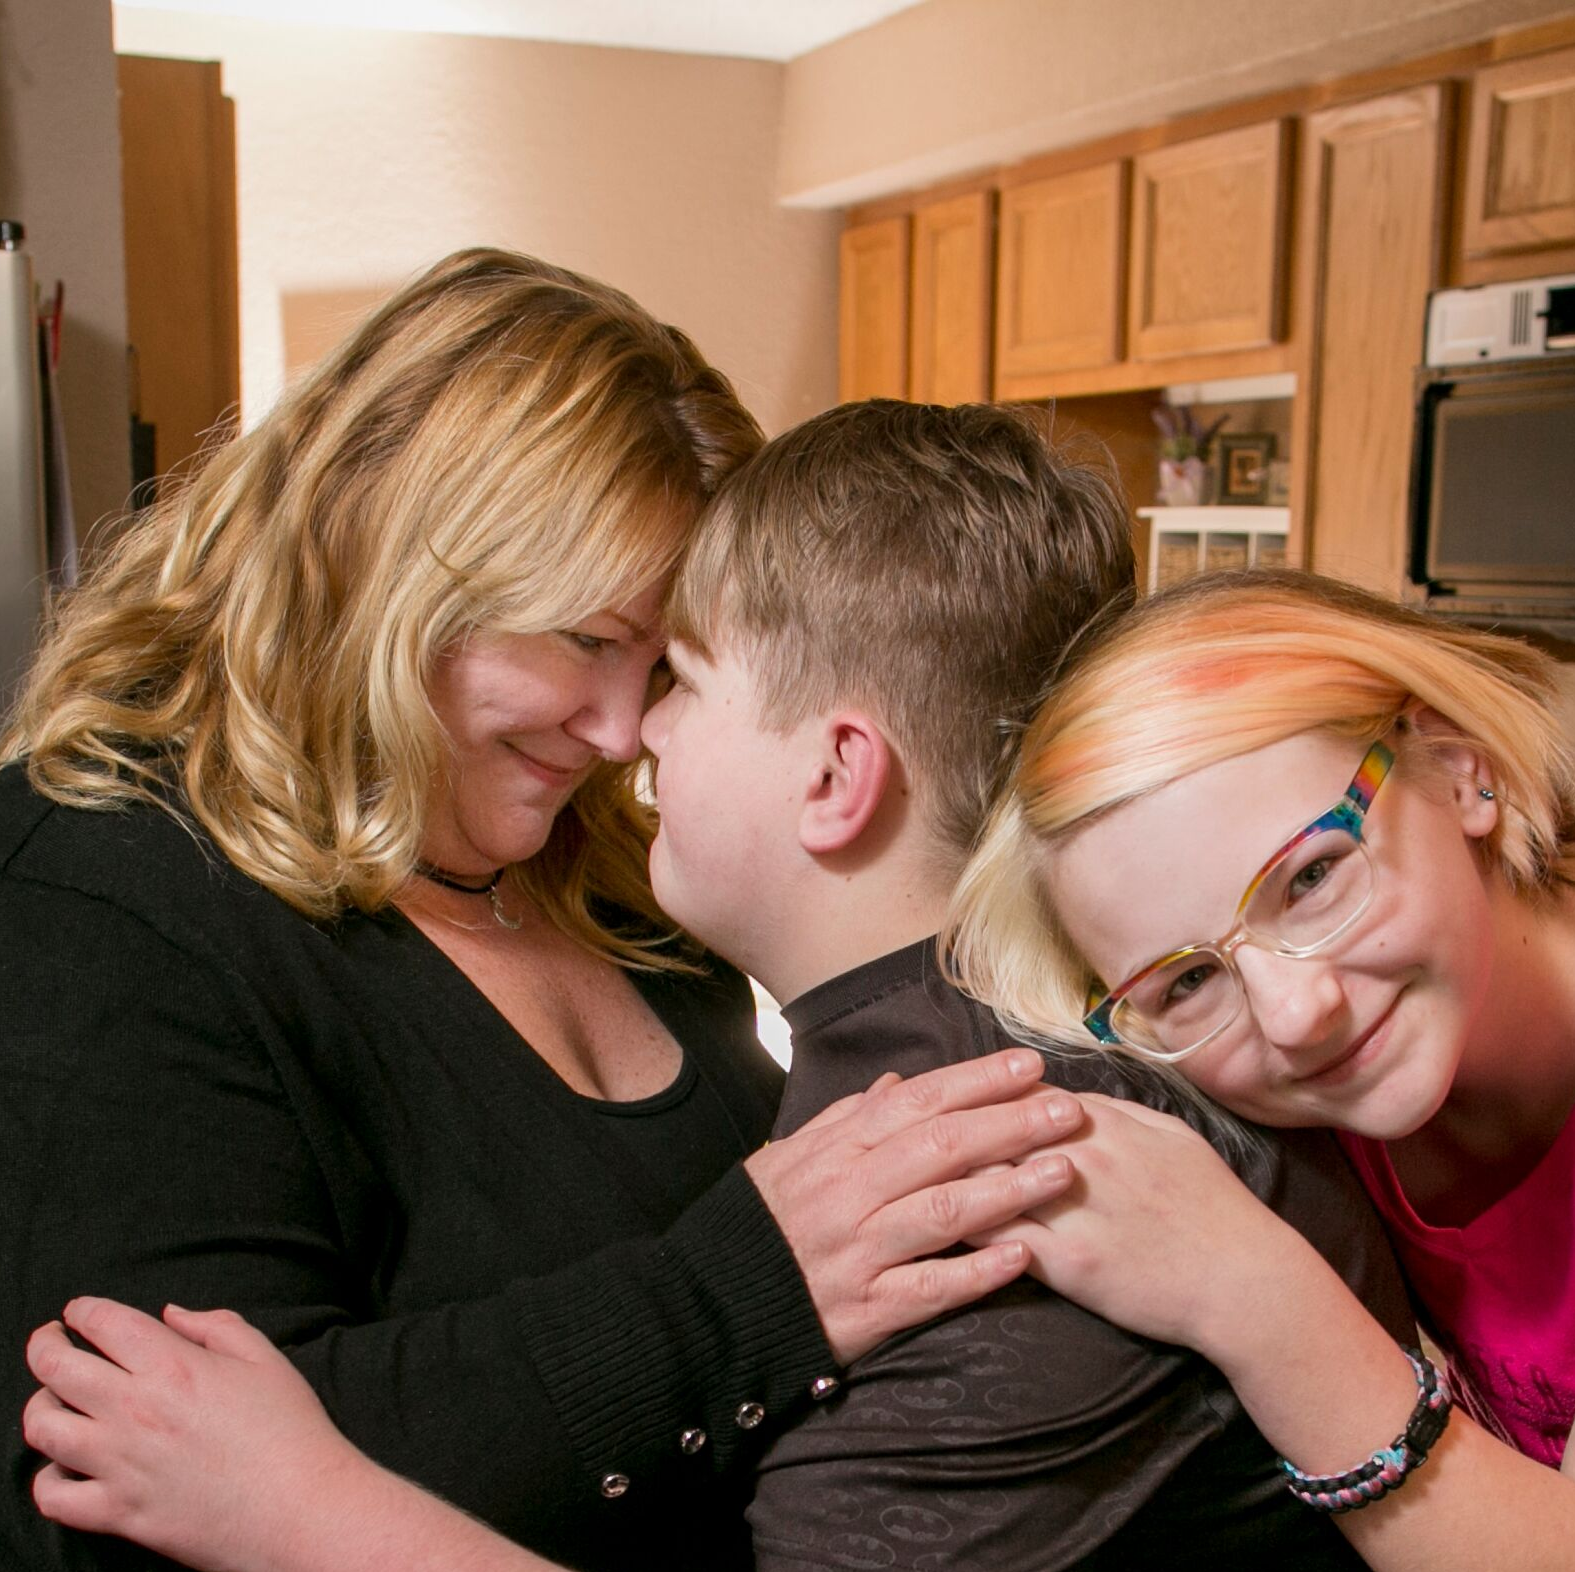 Shannon and her two children in their kitchen smiling.